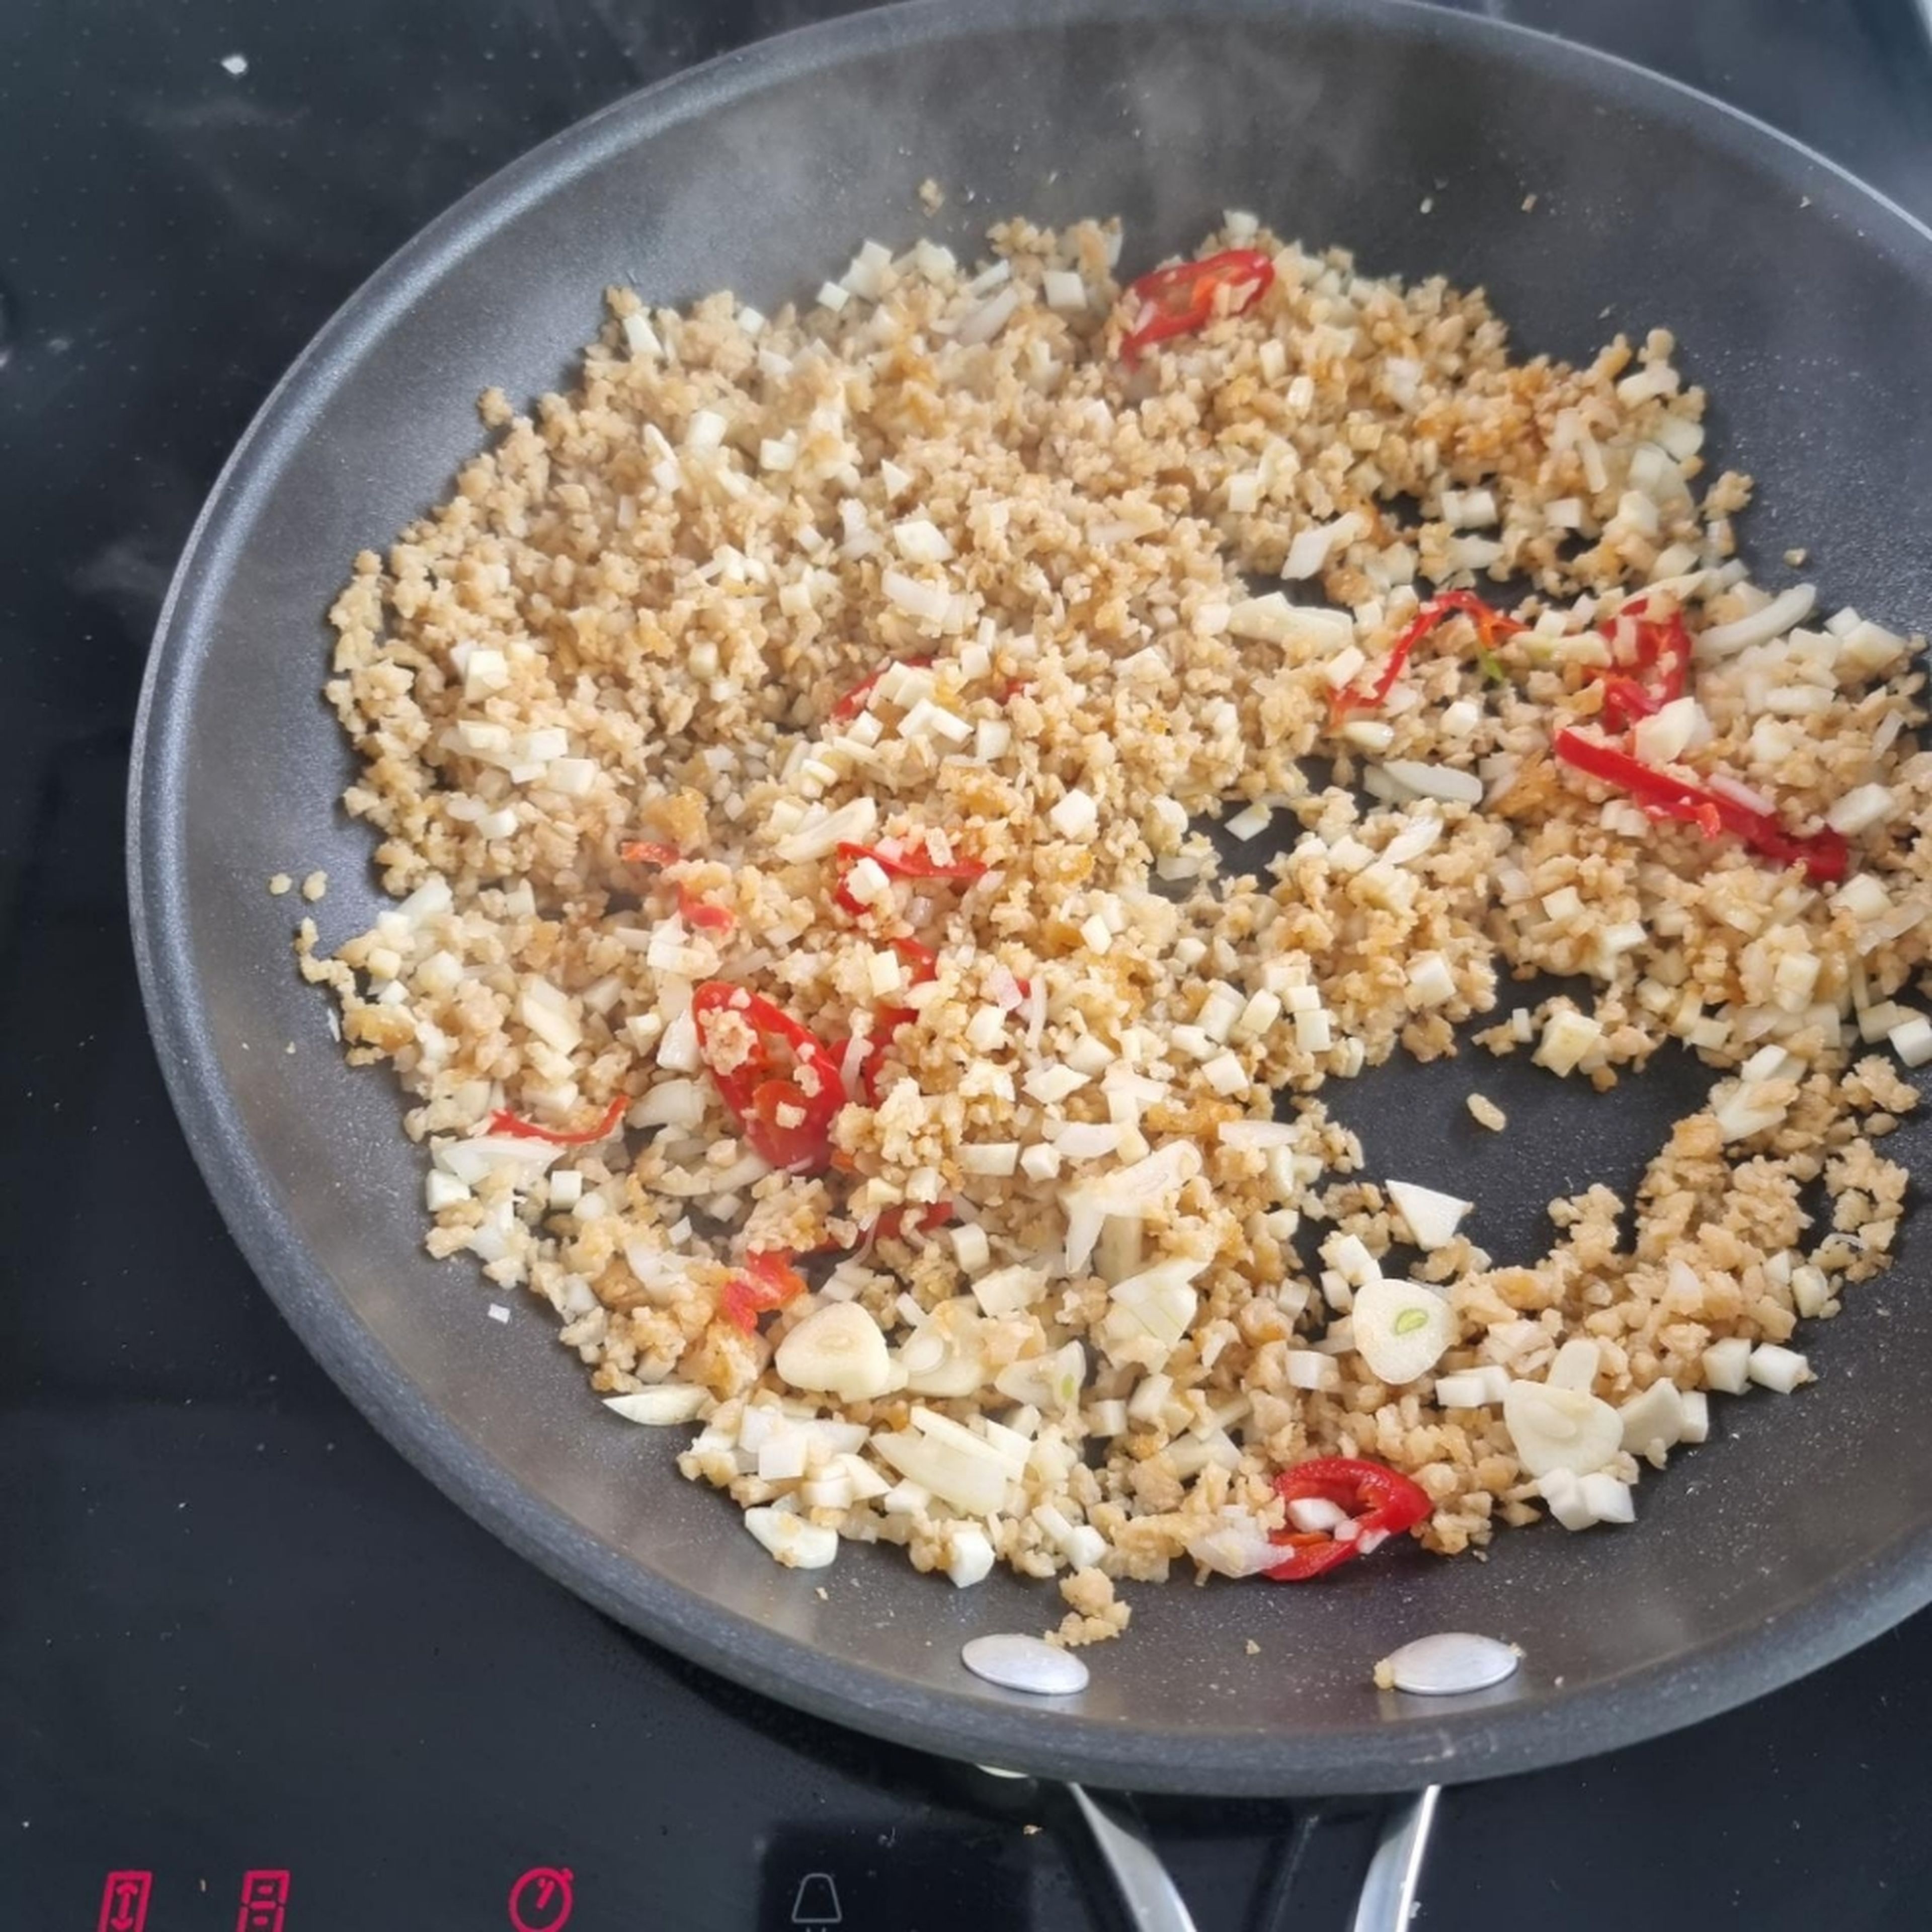 Fry the soy granules with the olive oil in a pan. Then add the cubed vegetables, the fennel seeds and the chili. Sauté until everything is well browned, add the tomato paste and mustard and sauté briefly.